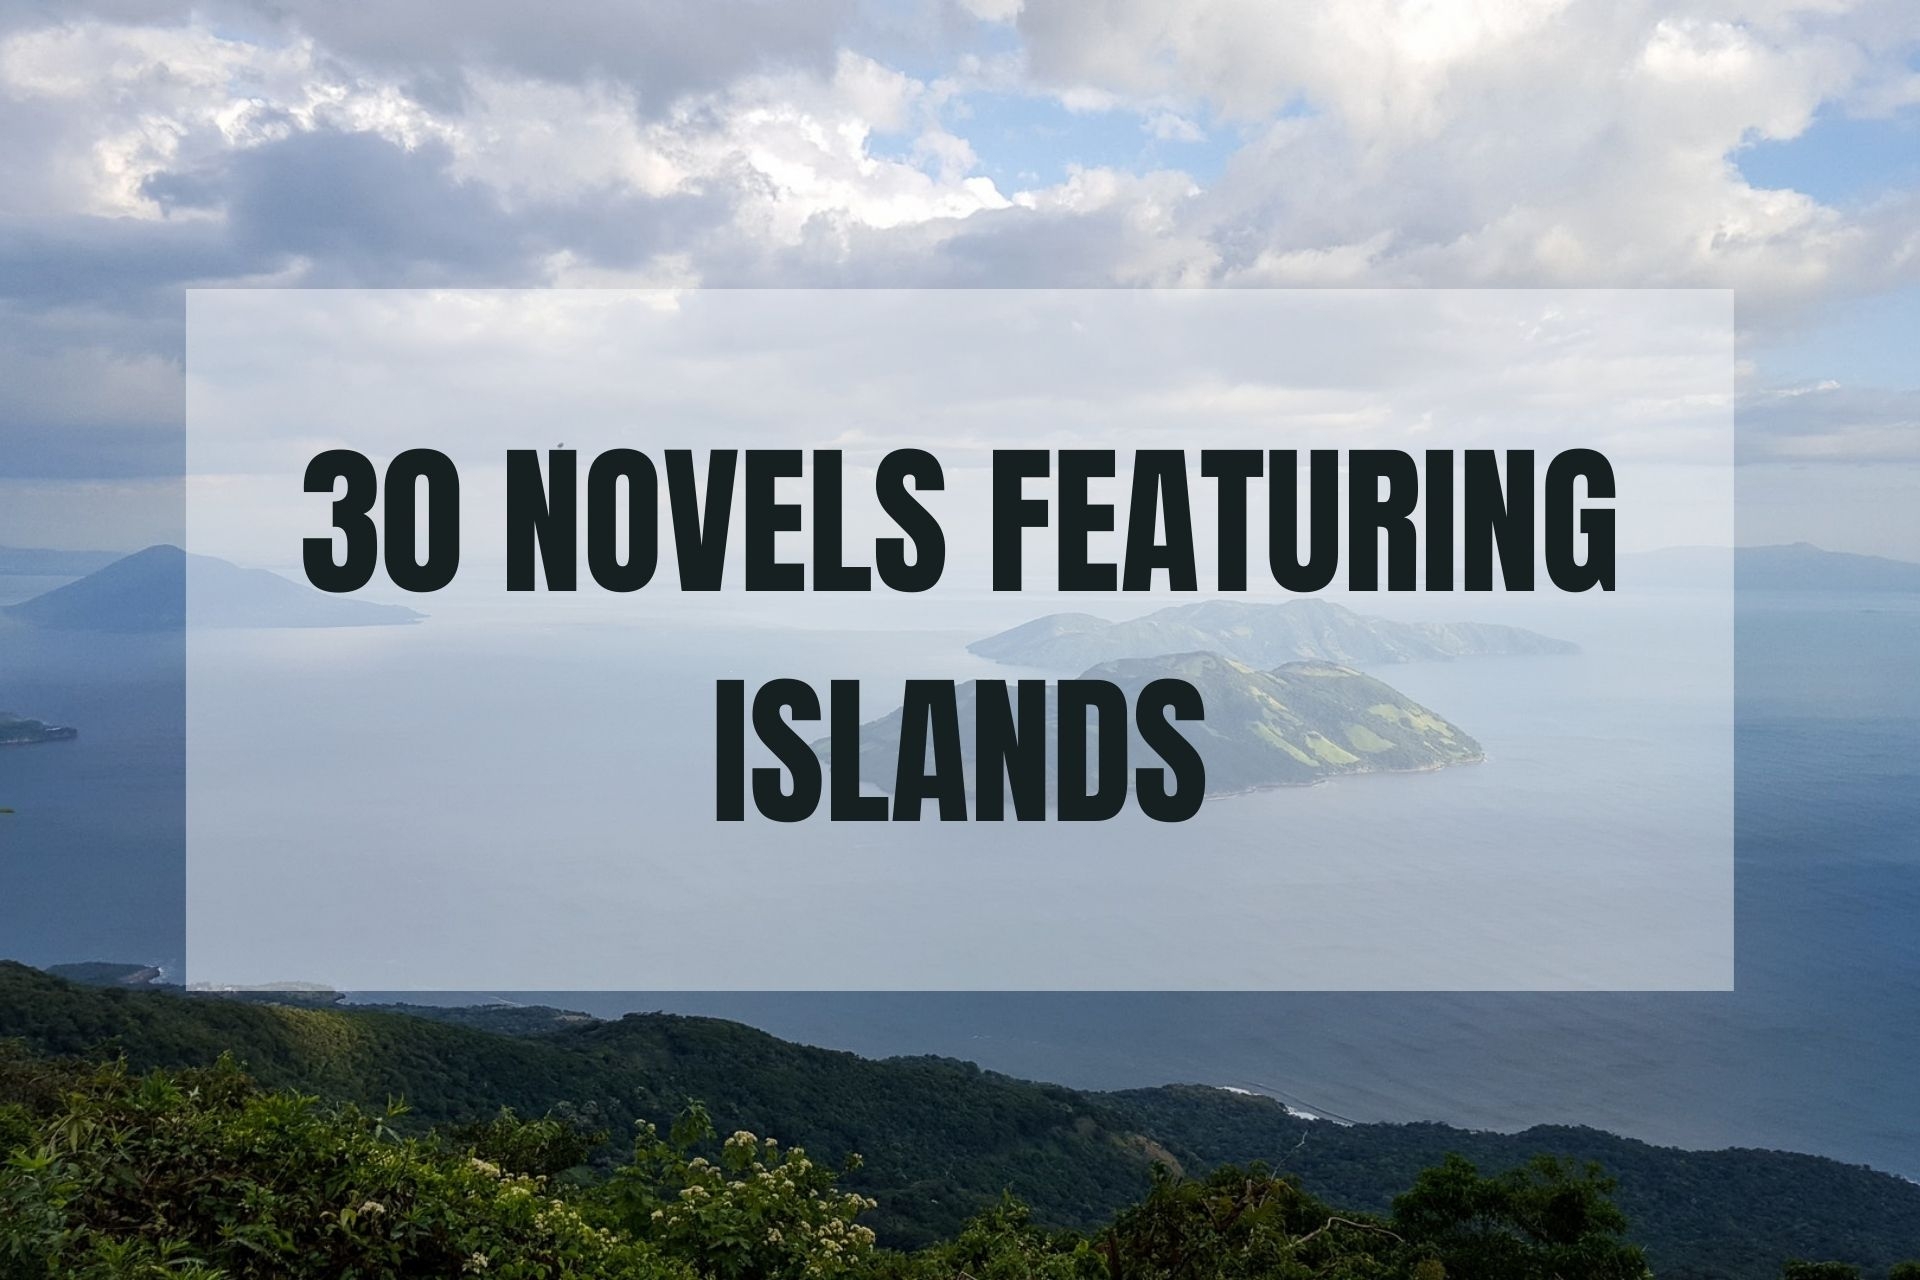 30 Novels Featuring Islands - Explore Fantastical Locations, Solve a Crime, or Sink into a Beautiful Romance